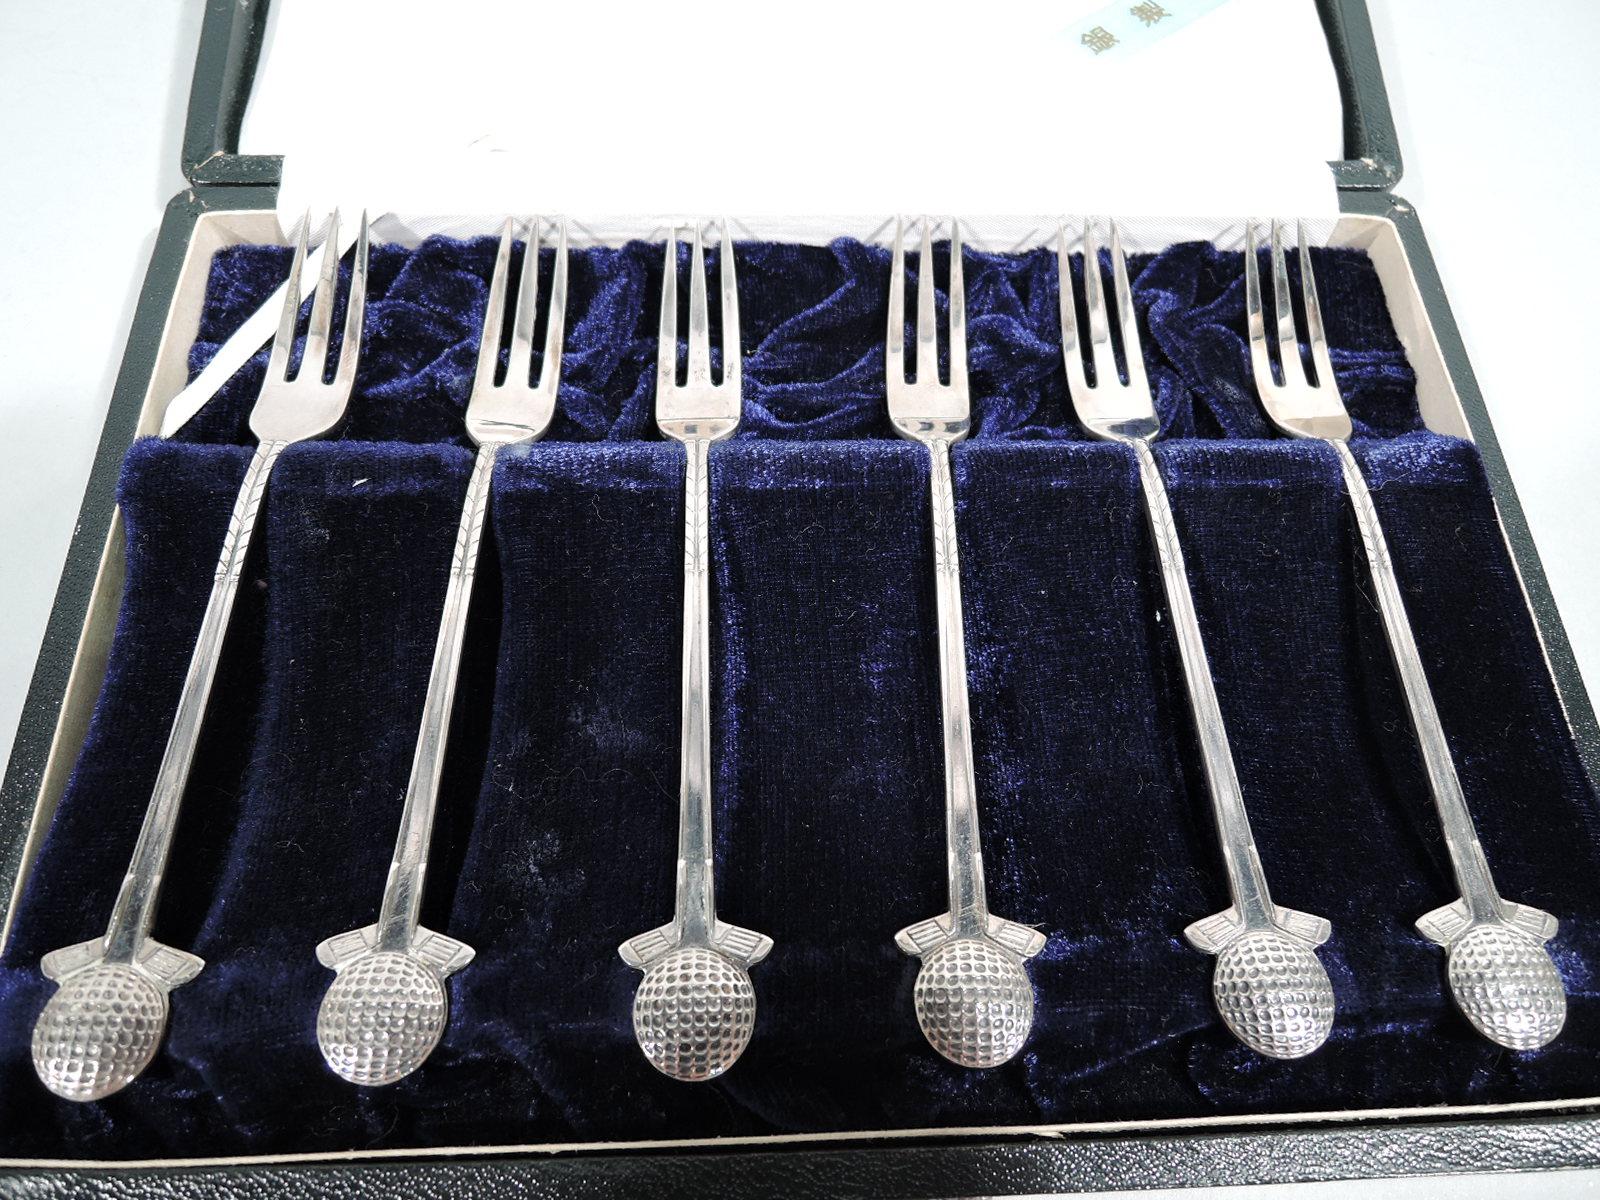 Set of 6 Japanese modern silver appetizer forks with golf motif. Handle in form of two upside down clubs with heads supporting ball. Narrow shank with 3 tines. In leather-bound case with silk lining and fitted velvet. A great gift for the swinger in